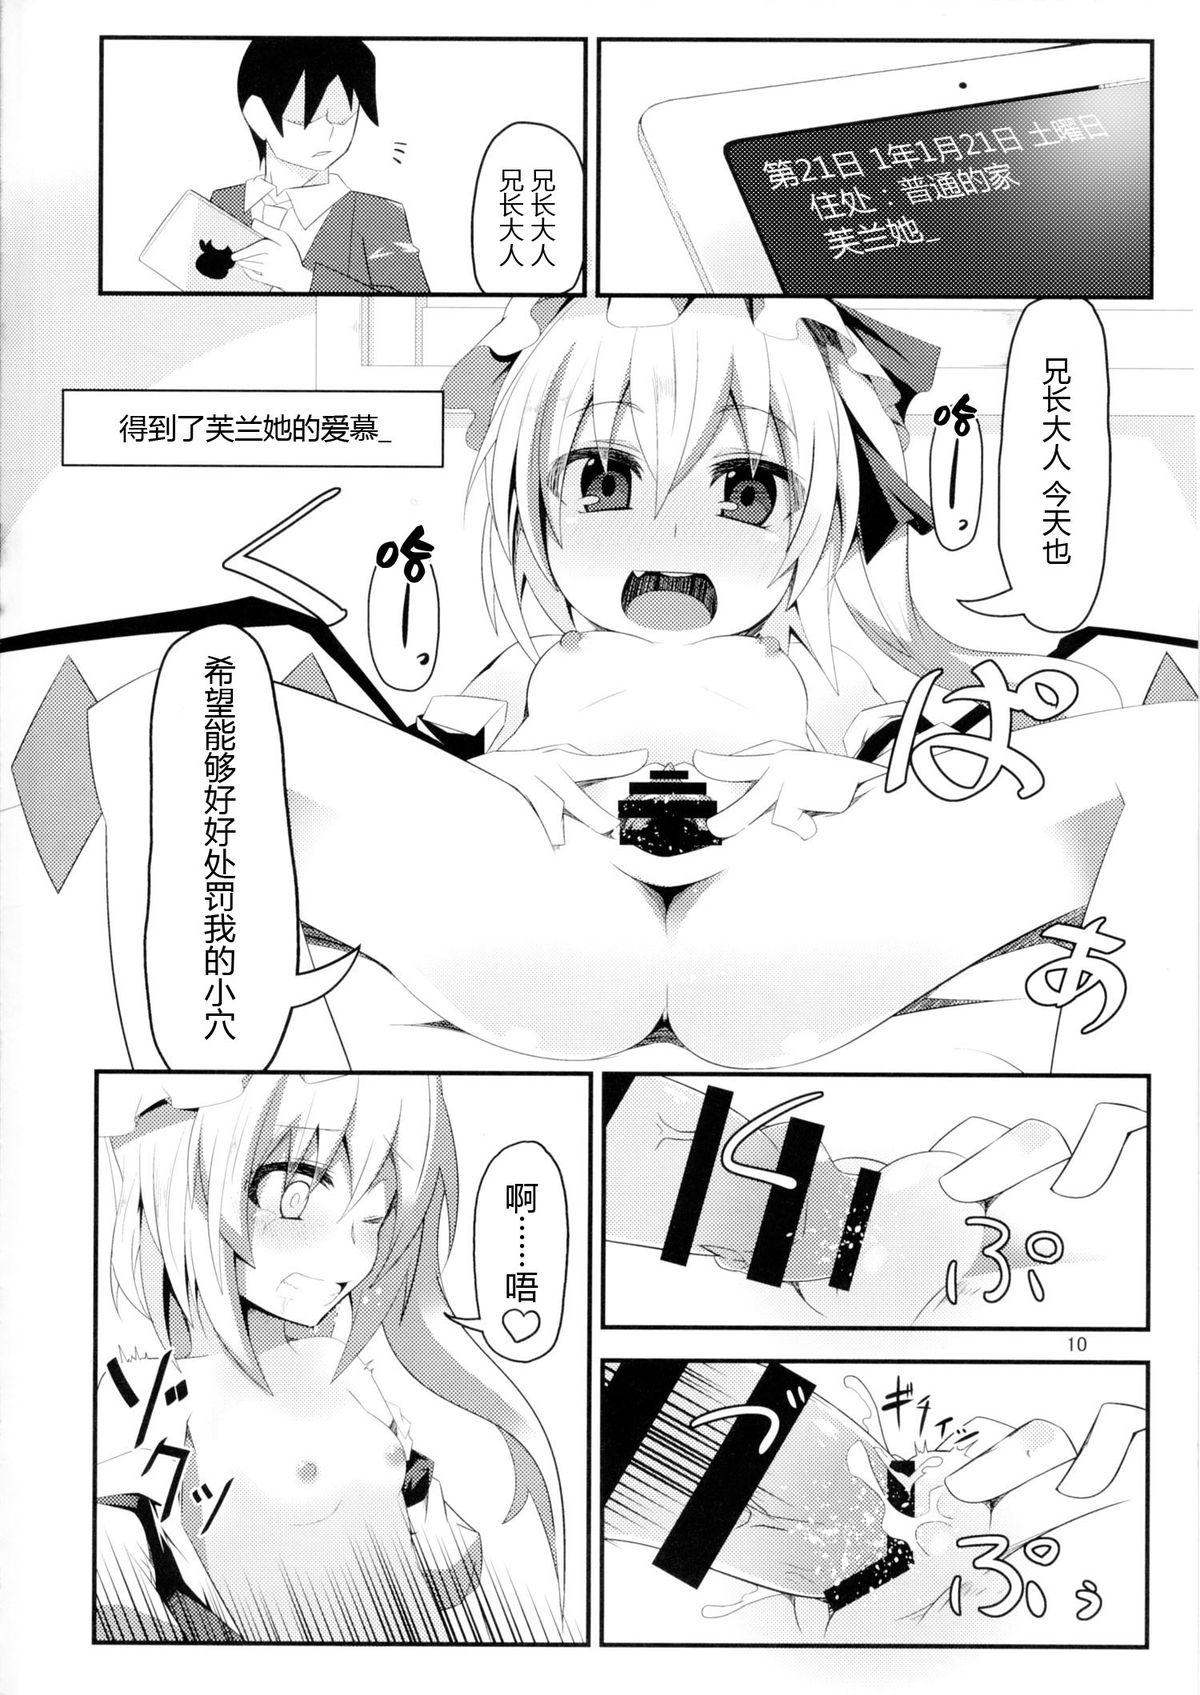 Perfect Girl Porn er@Flan - Touhou project Story - Page 10